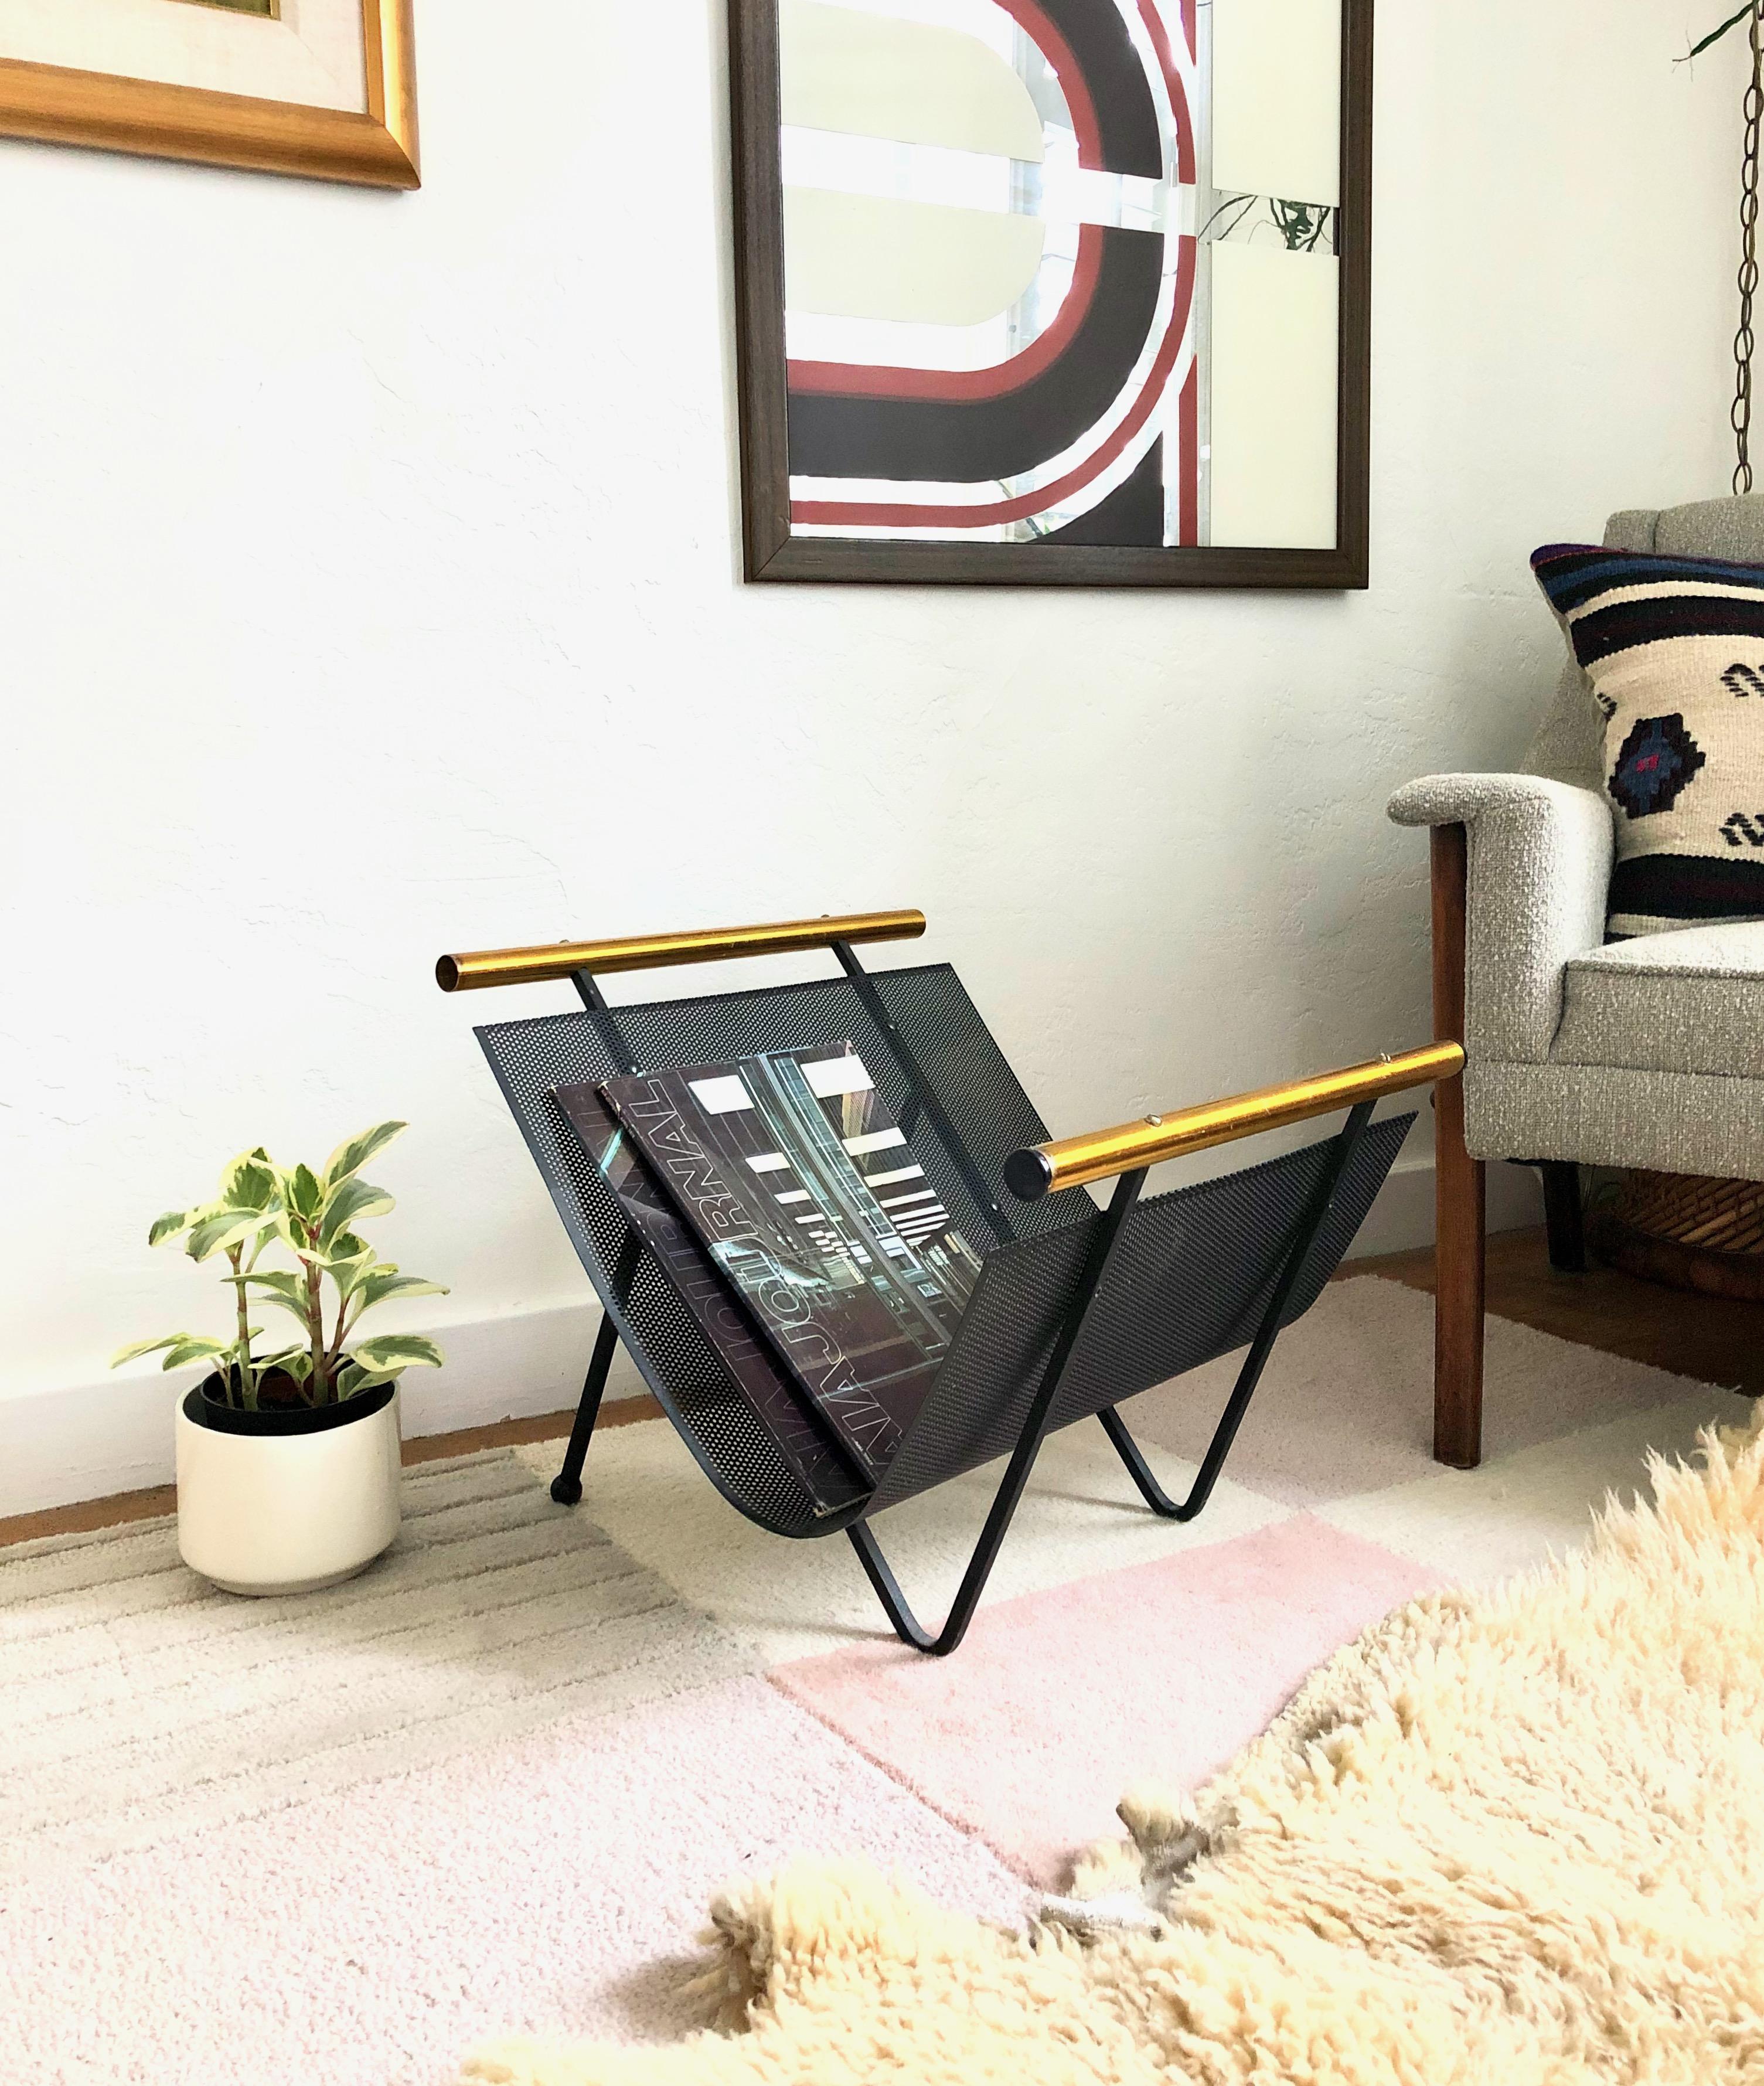 A mid century fireplace log holder designed by Gene Tepper for Smith Tepper Sundberg. Great atomic design, featuring a curved sheet of perforated black metal and bent iron legs with two gold toned handles on either side. Can also be used as a